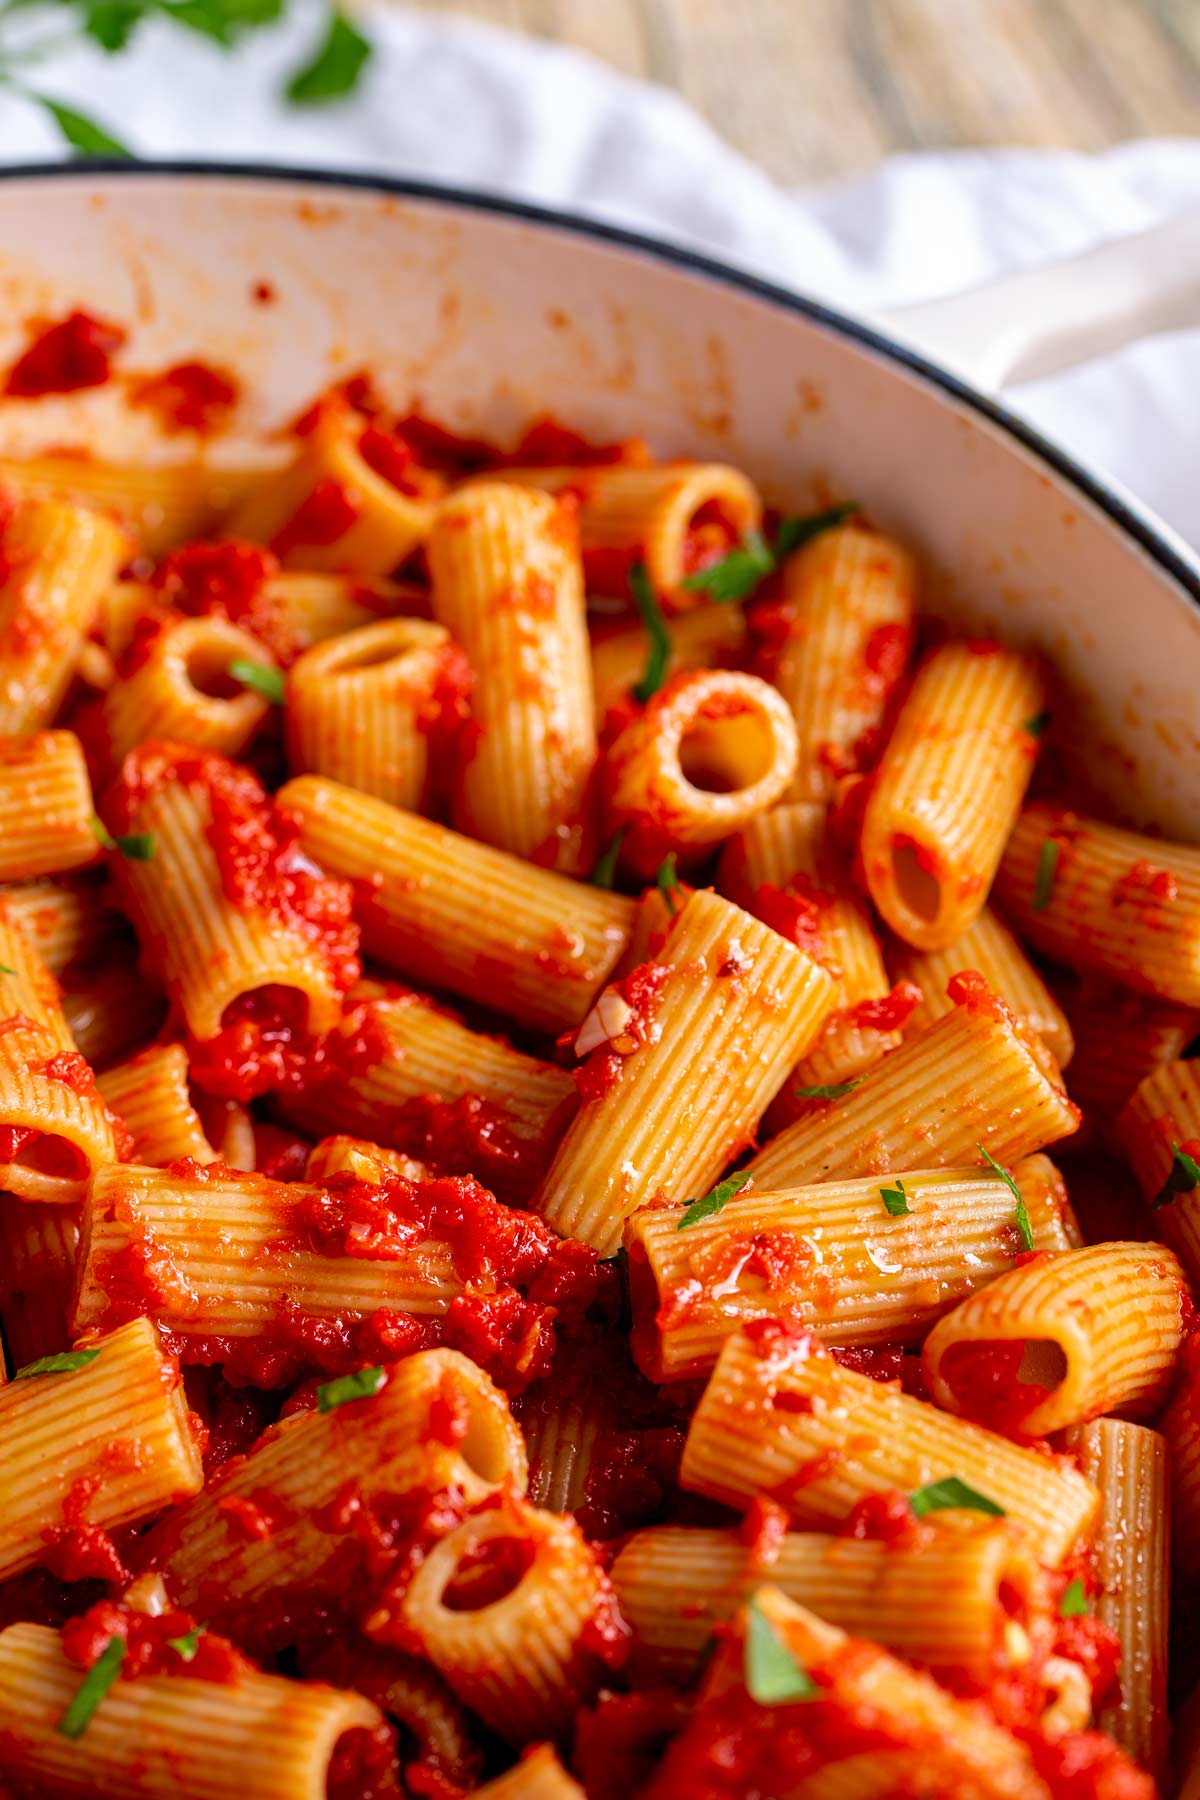 close up on how the sauce coats the pasta in the pan